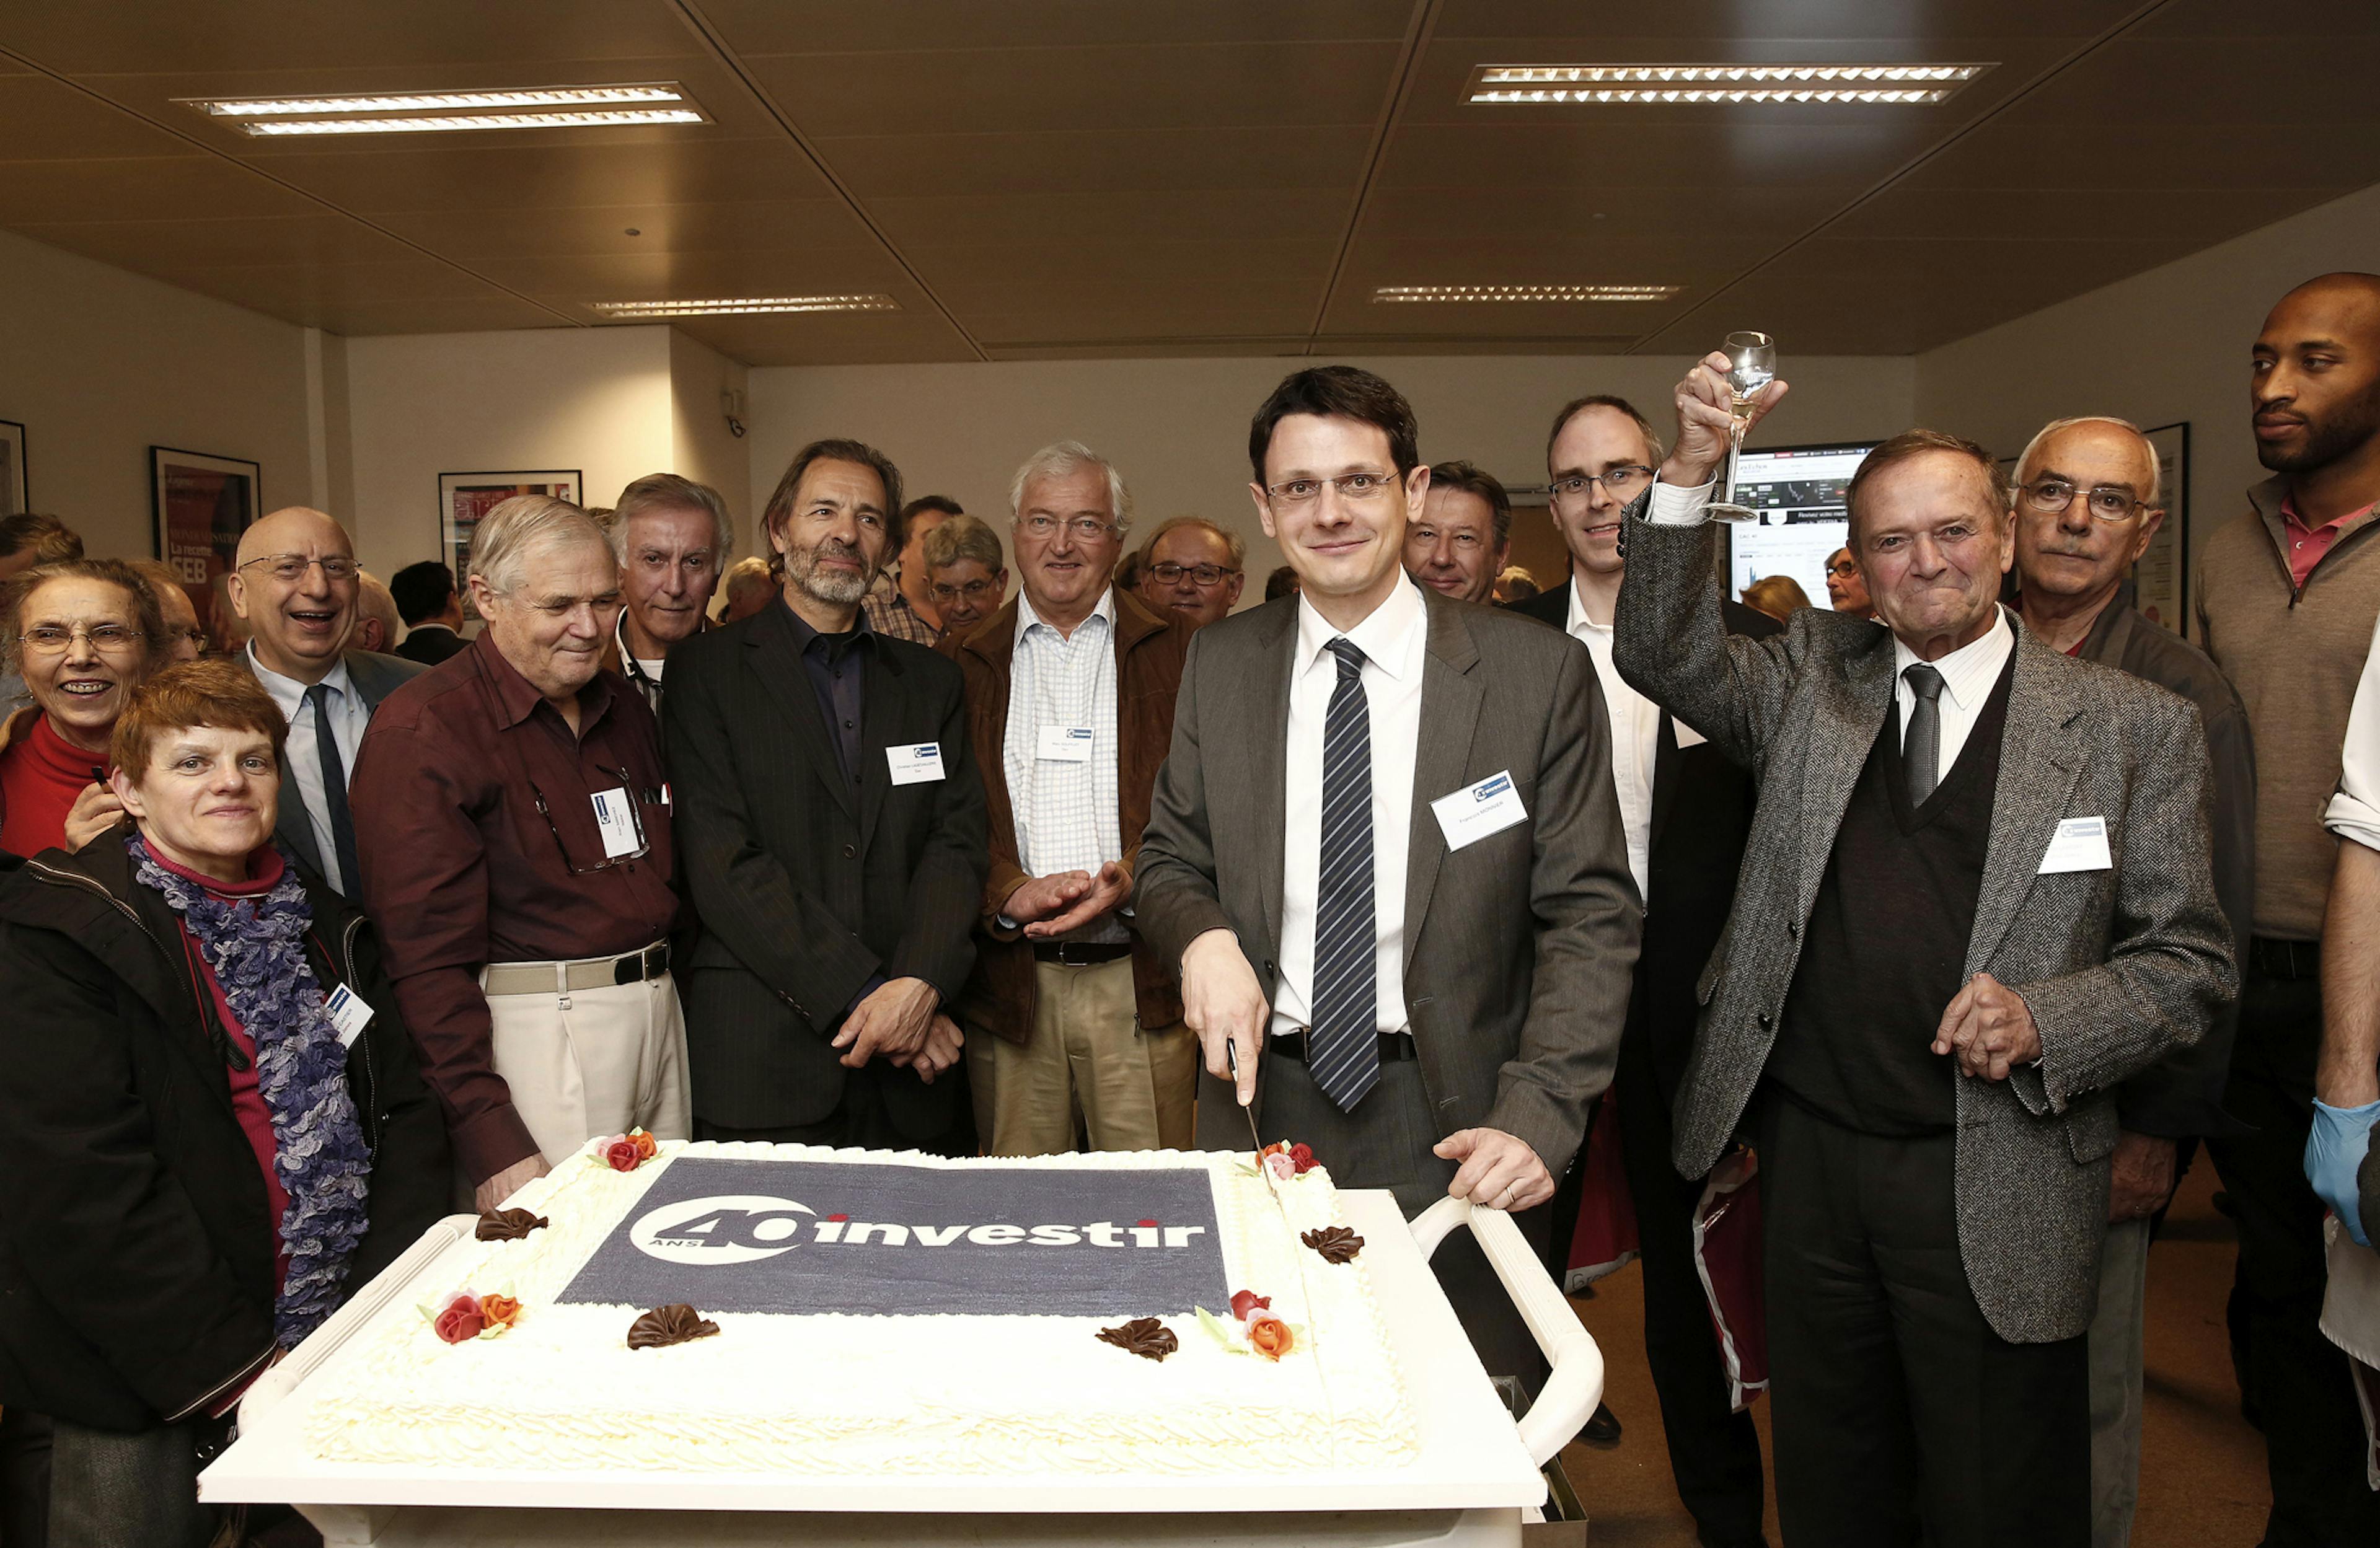 "40 years of Investir" event.